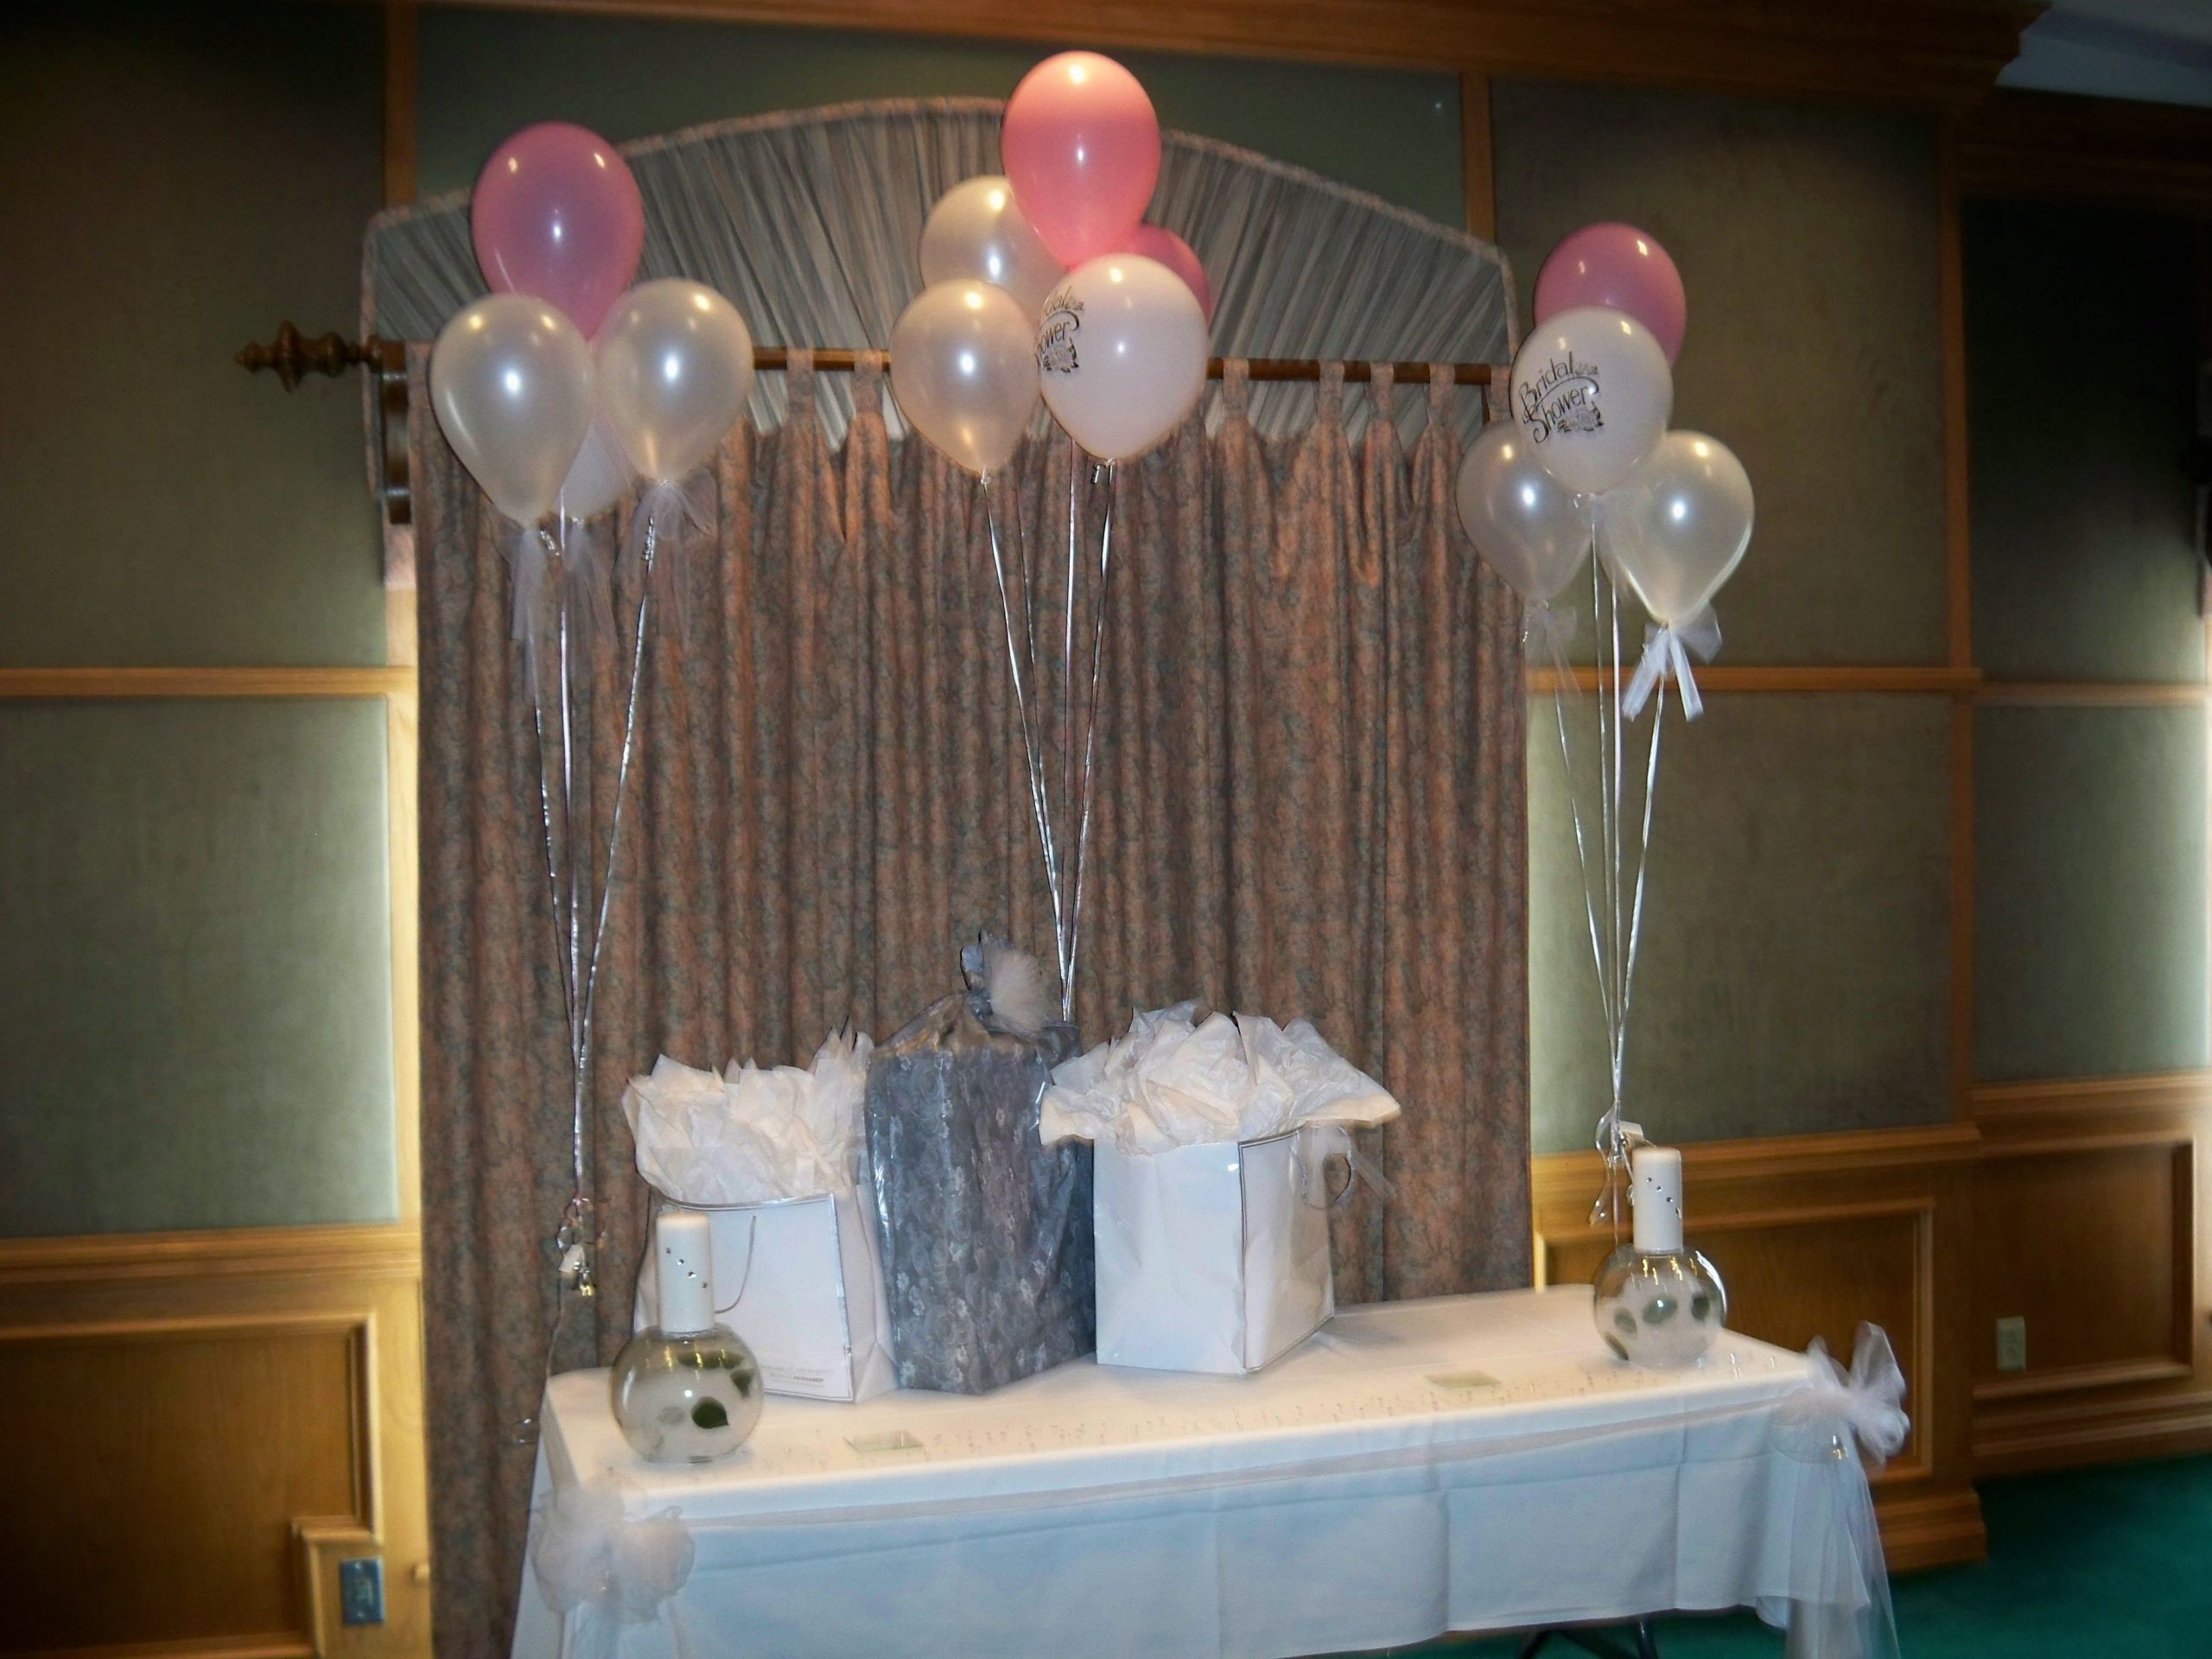 Decorating Ideas For Baby Shower Gift Table
 Baby shower t table